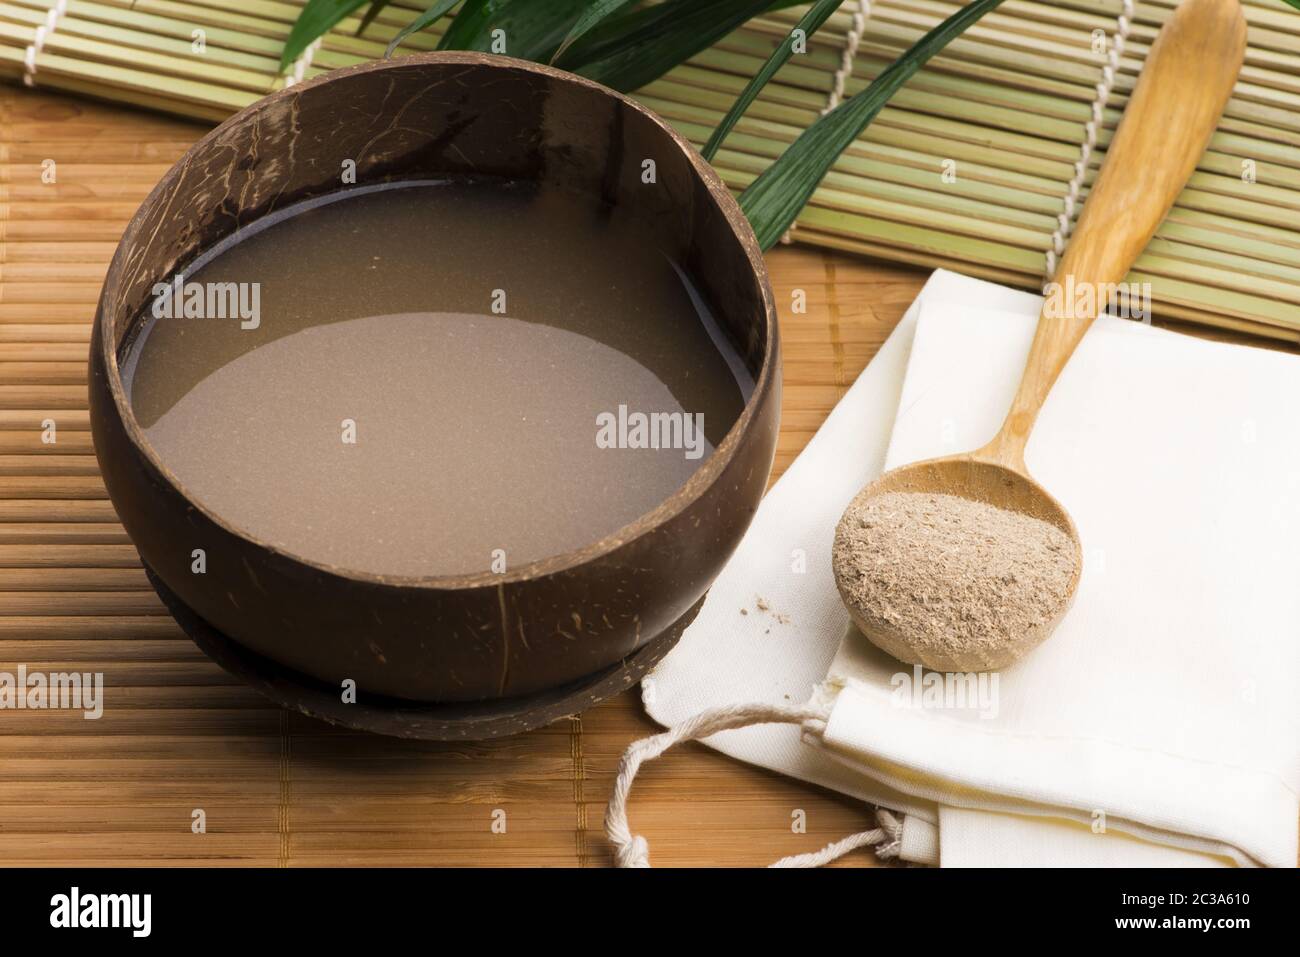 Kava drink made from the roots of the kava plant mixed with water Stock Photo